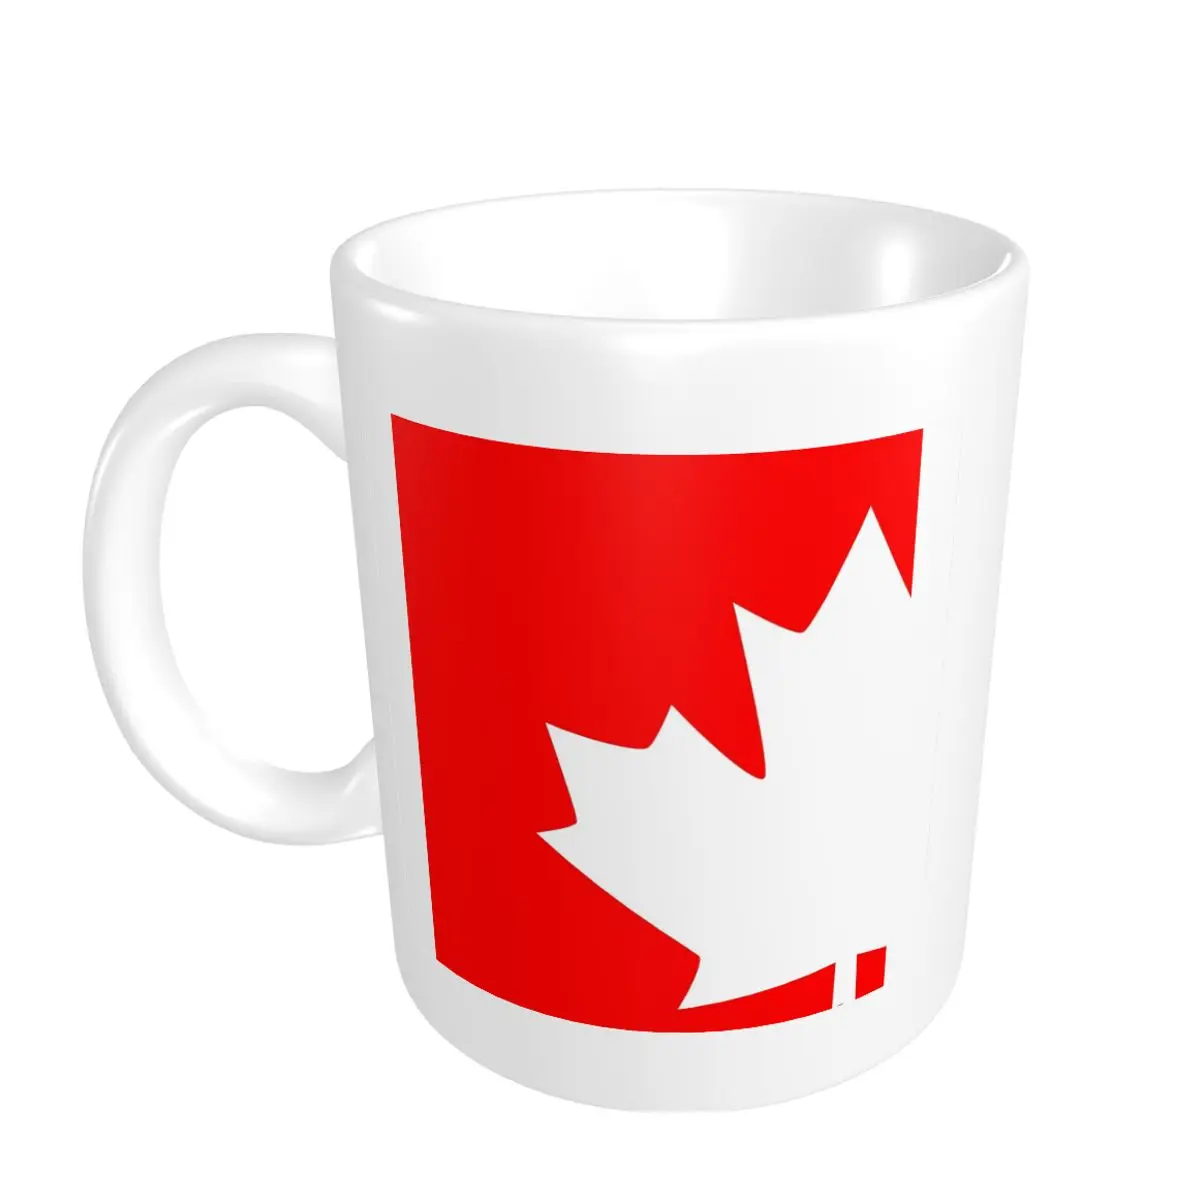 

Promo Novelty Canada Maple Leaf Flag Emblem Mugs Humor Graphic R333 CUPS Print coffee cups